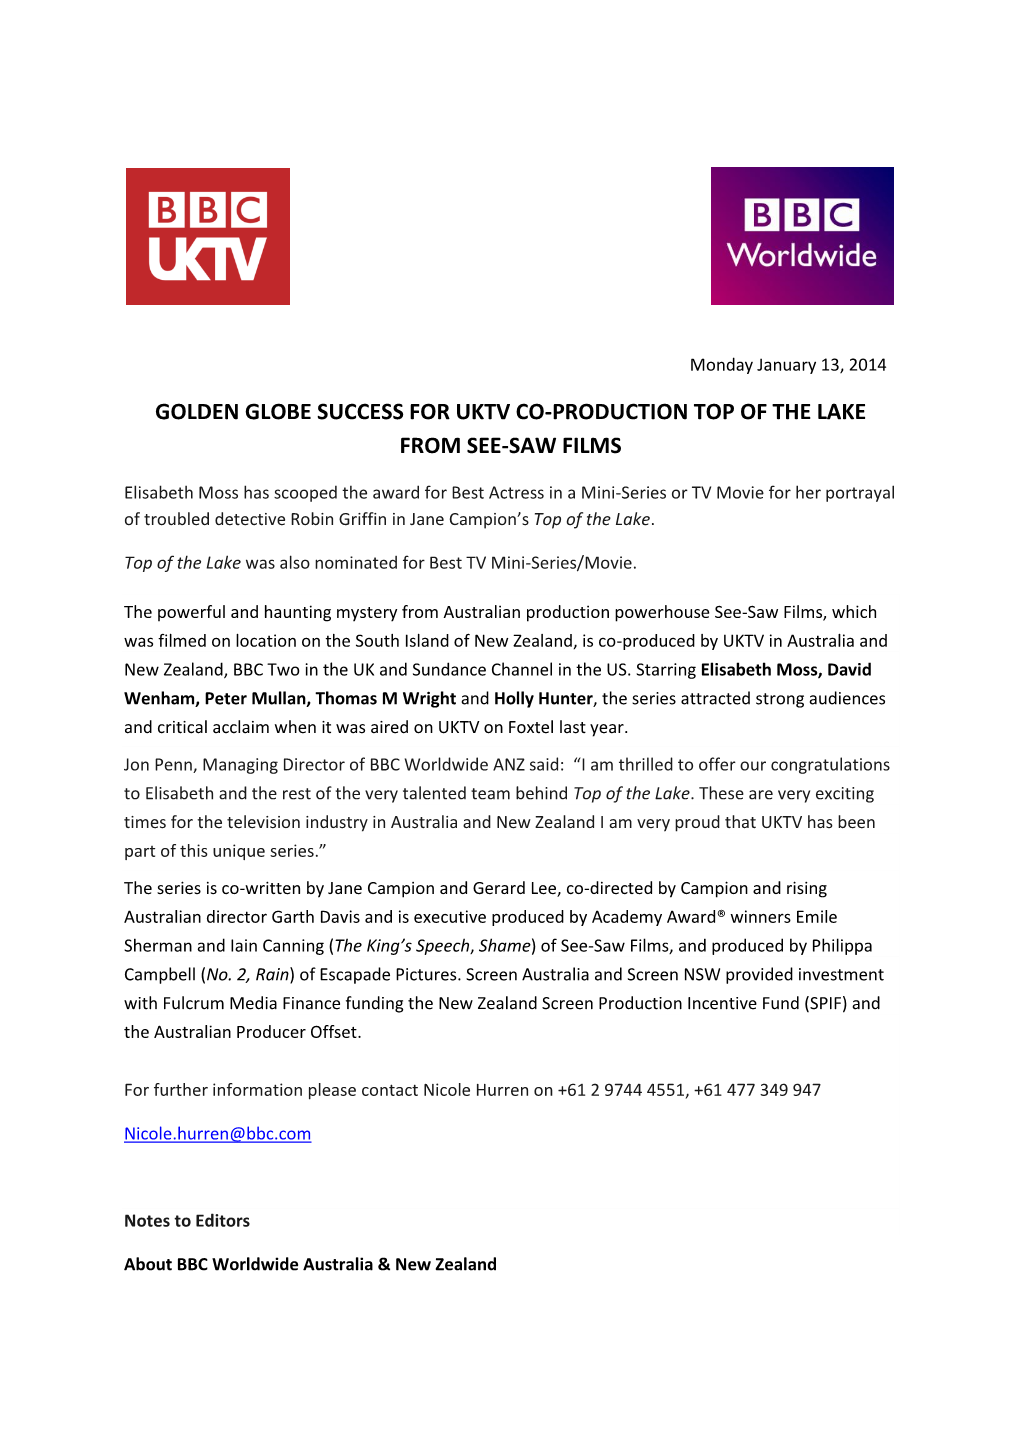 Golden Globe Success for Uktv Co-Production Top of the Lake from See-Saw Films